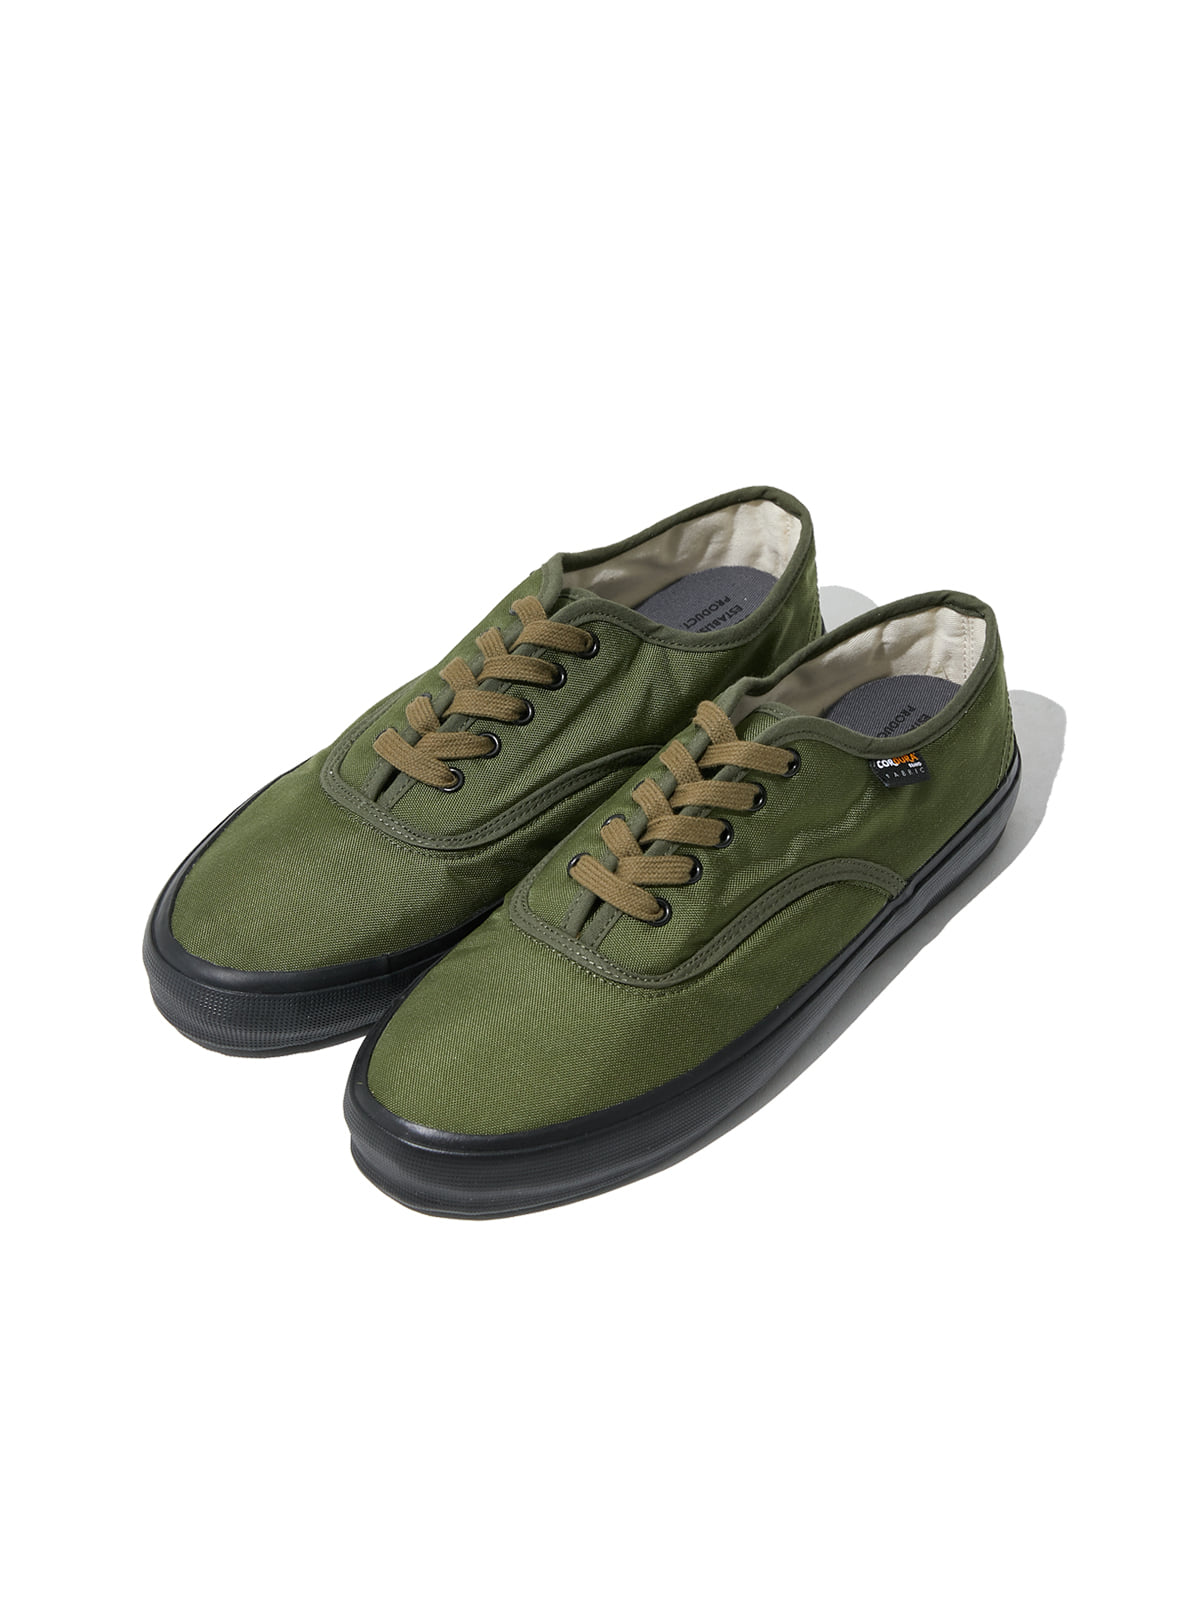 US NAVY MILITARY TRAINER (OLIVE)